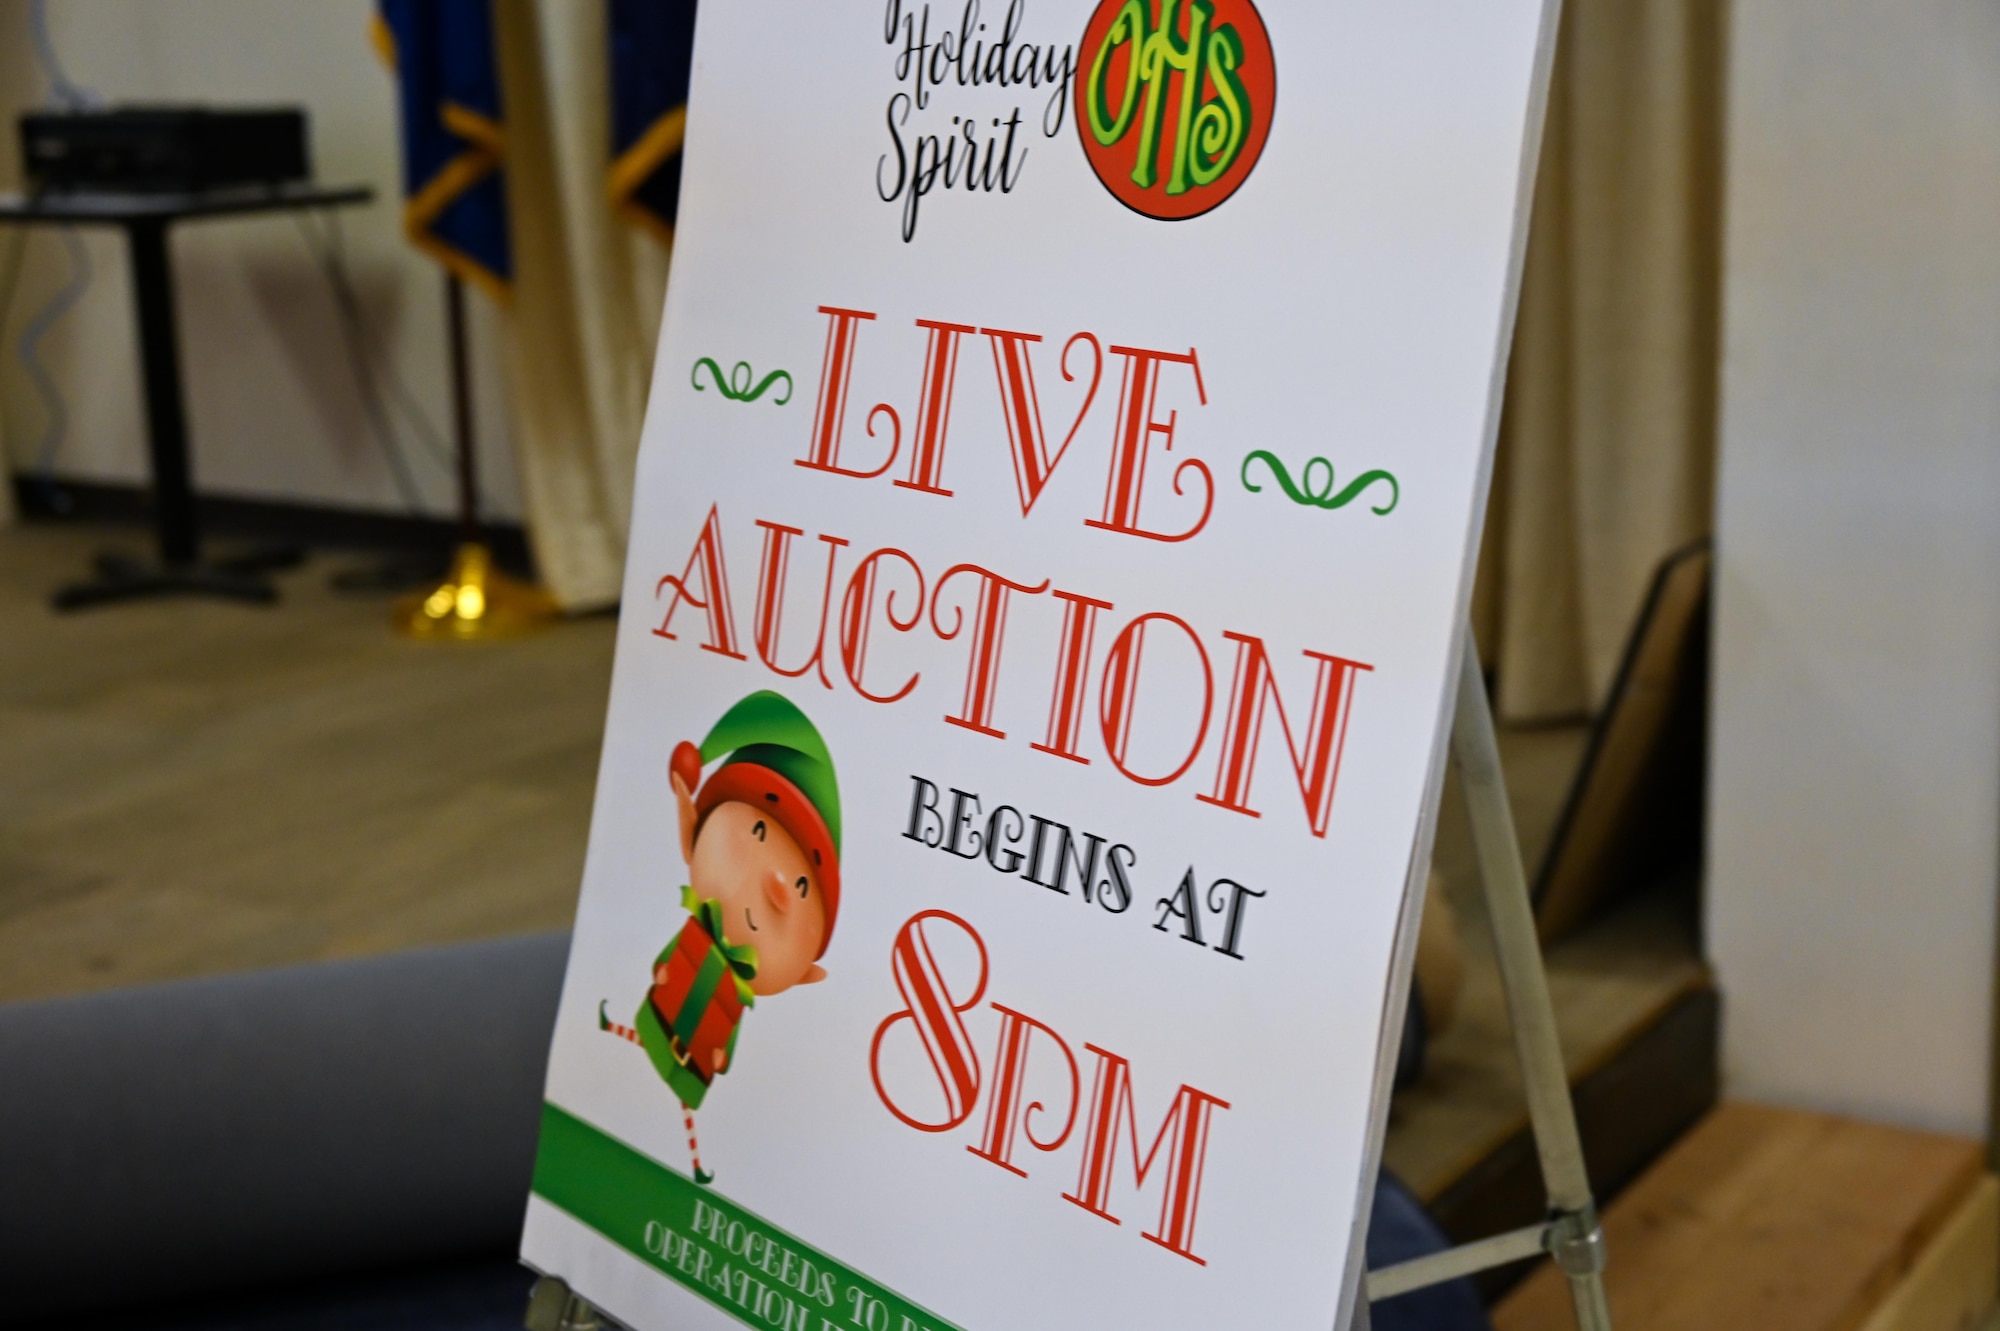 Live auction begins at 8 pm sign